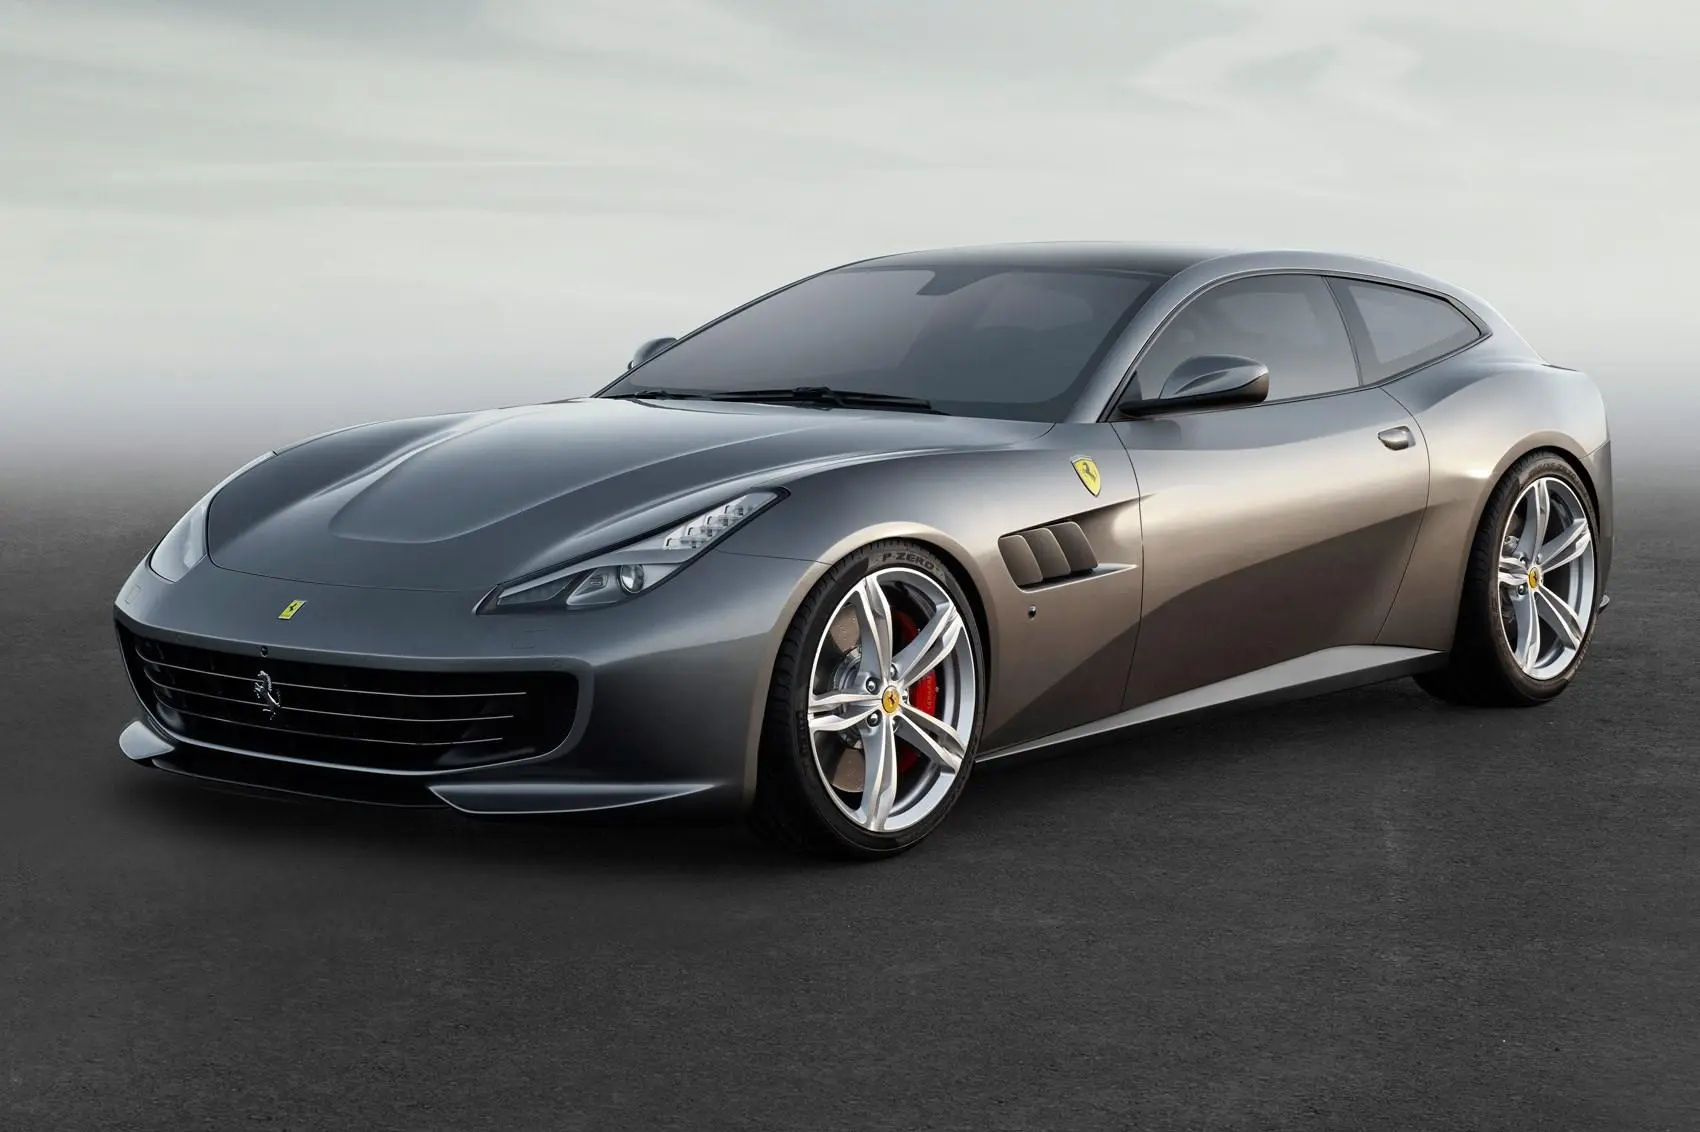 ferrari gtc4 lusso specs - How long is the lusso 0 to 60